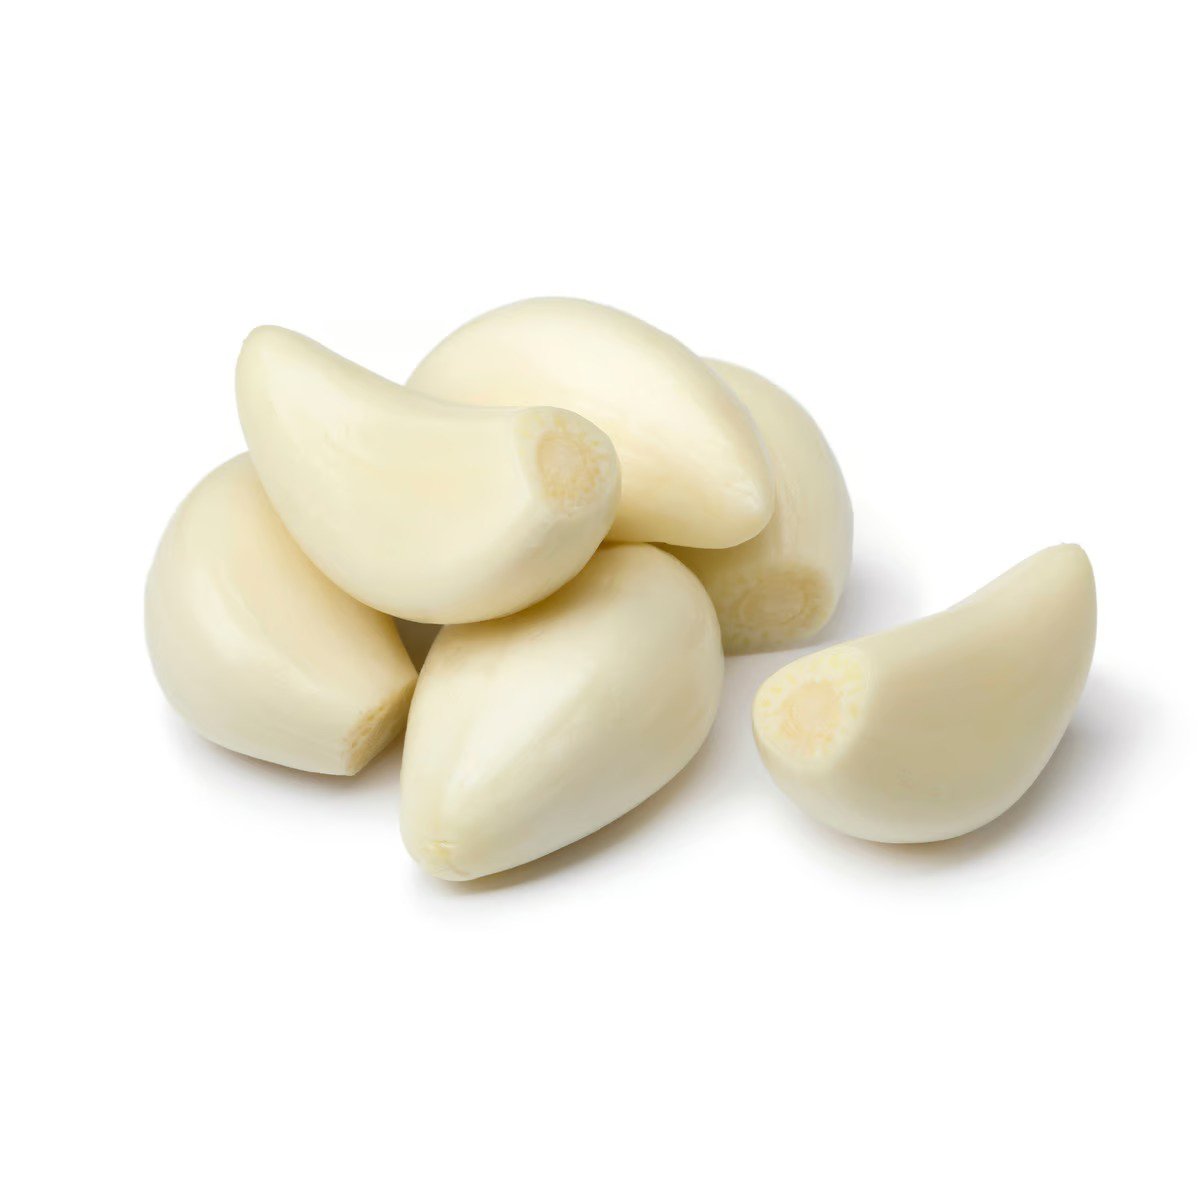 Garlic Peeled 500g Approx Weight